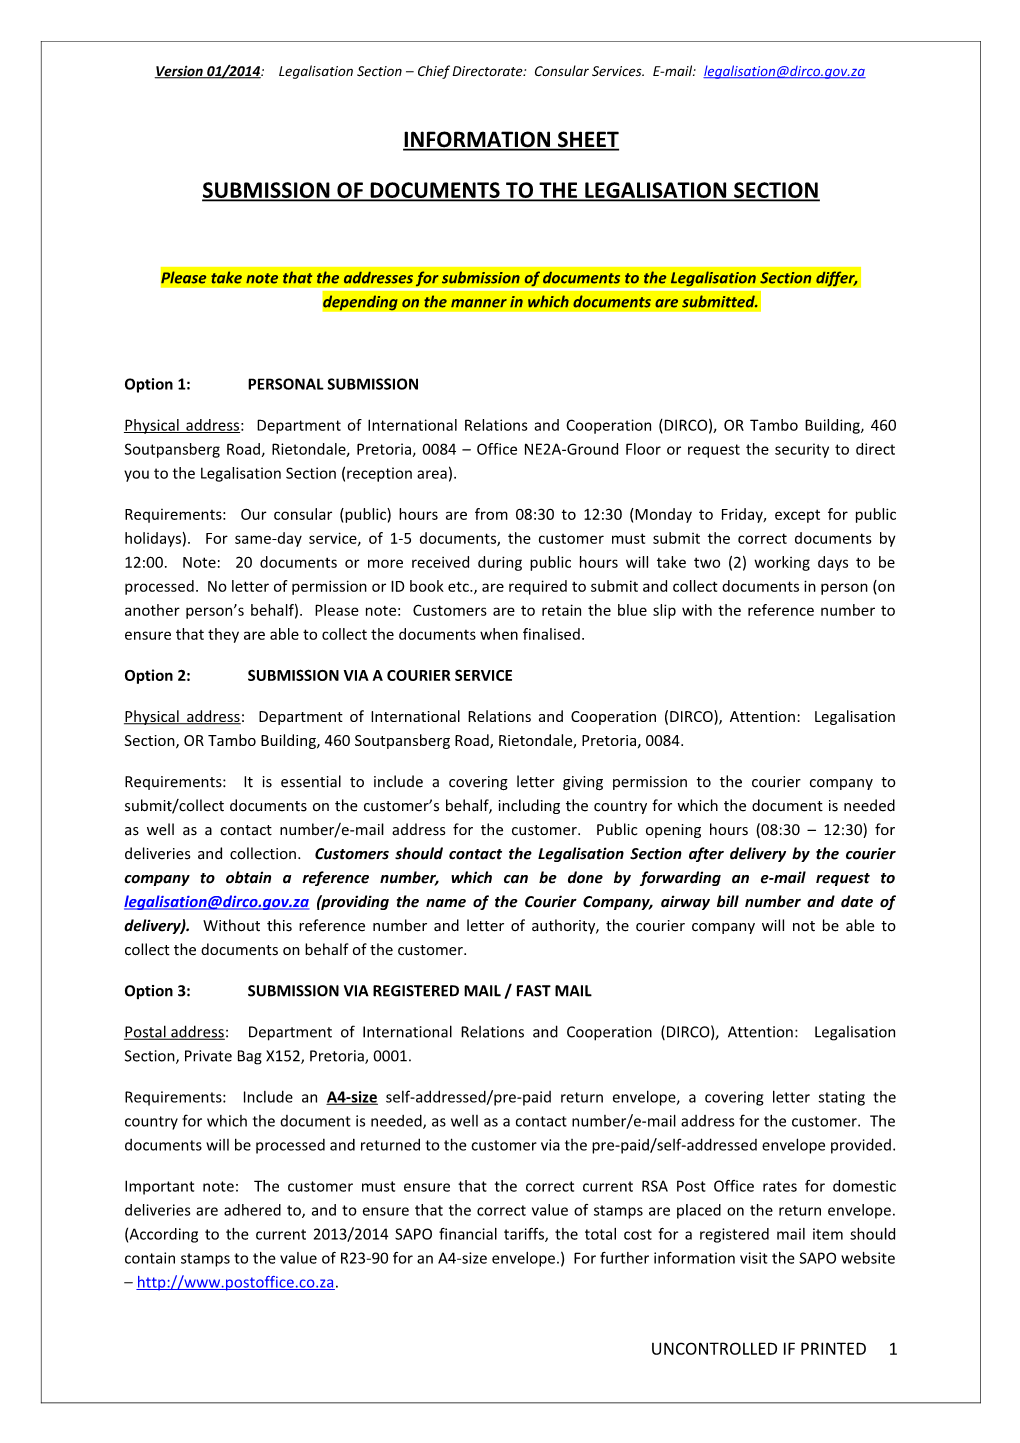 Version 01/2014 : Legalisation Section Chief Directorate: Consular Services. E-Mail